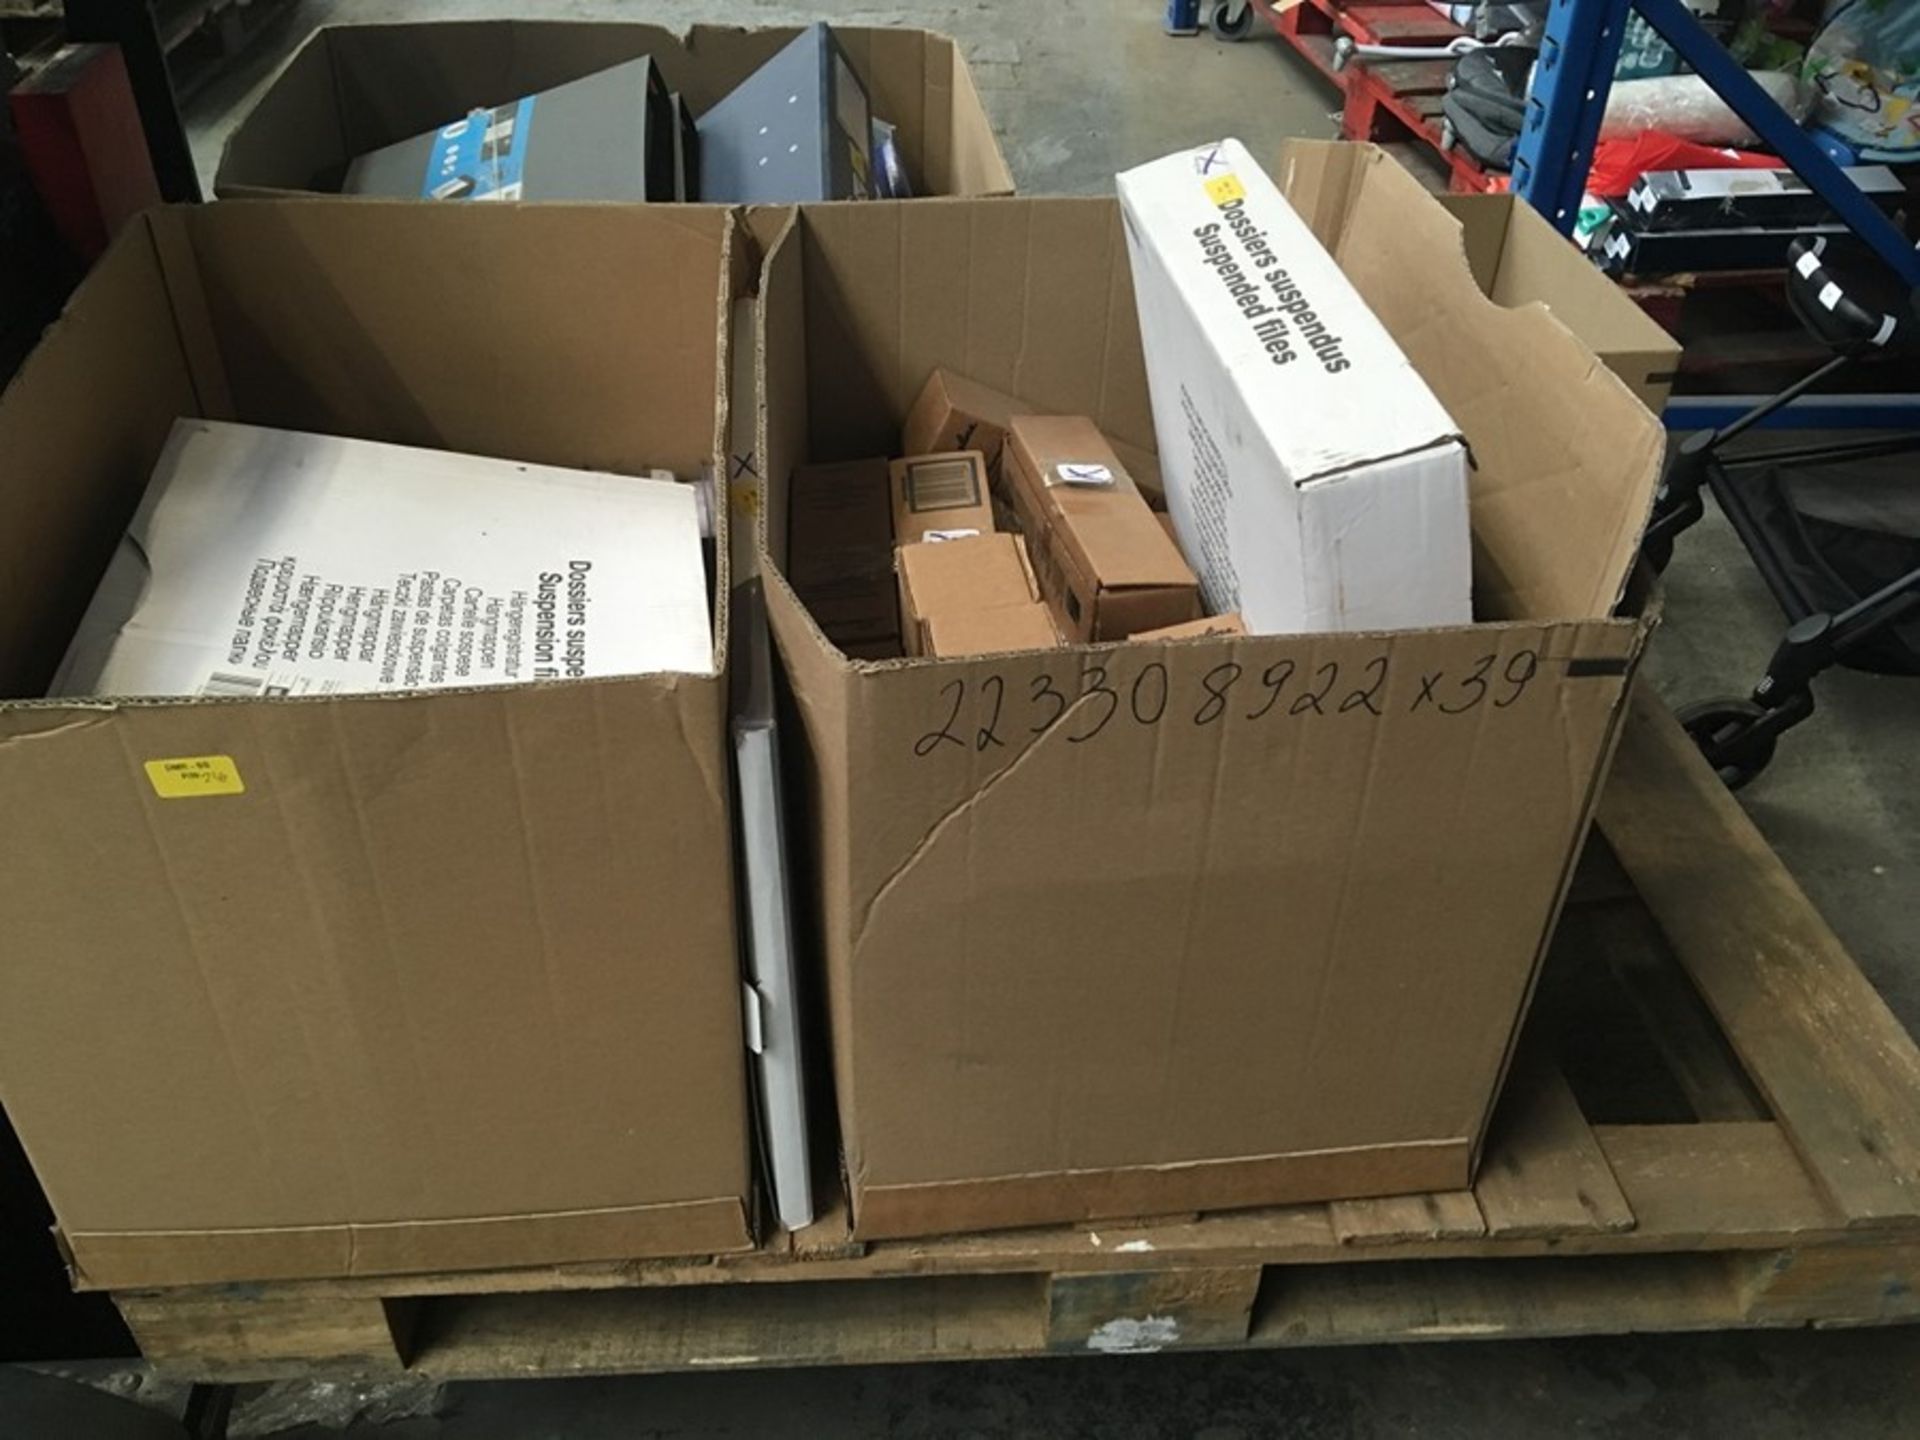 1 LOT TO CONTAIN ASSORTED ITEMS / INCLUDES FILES, SOAP DISPENSERS, MONITOR CABLES & SHREDDER OIL /